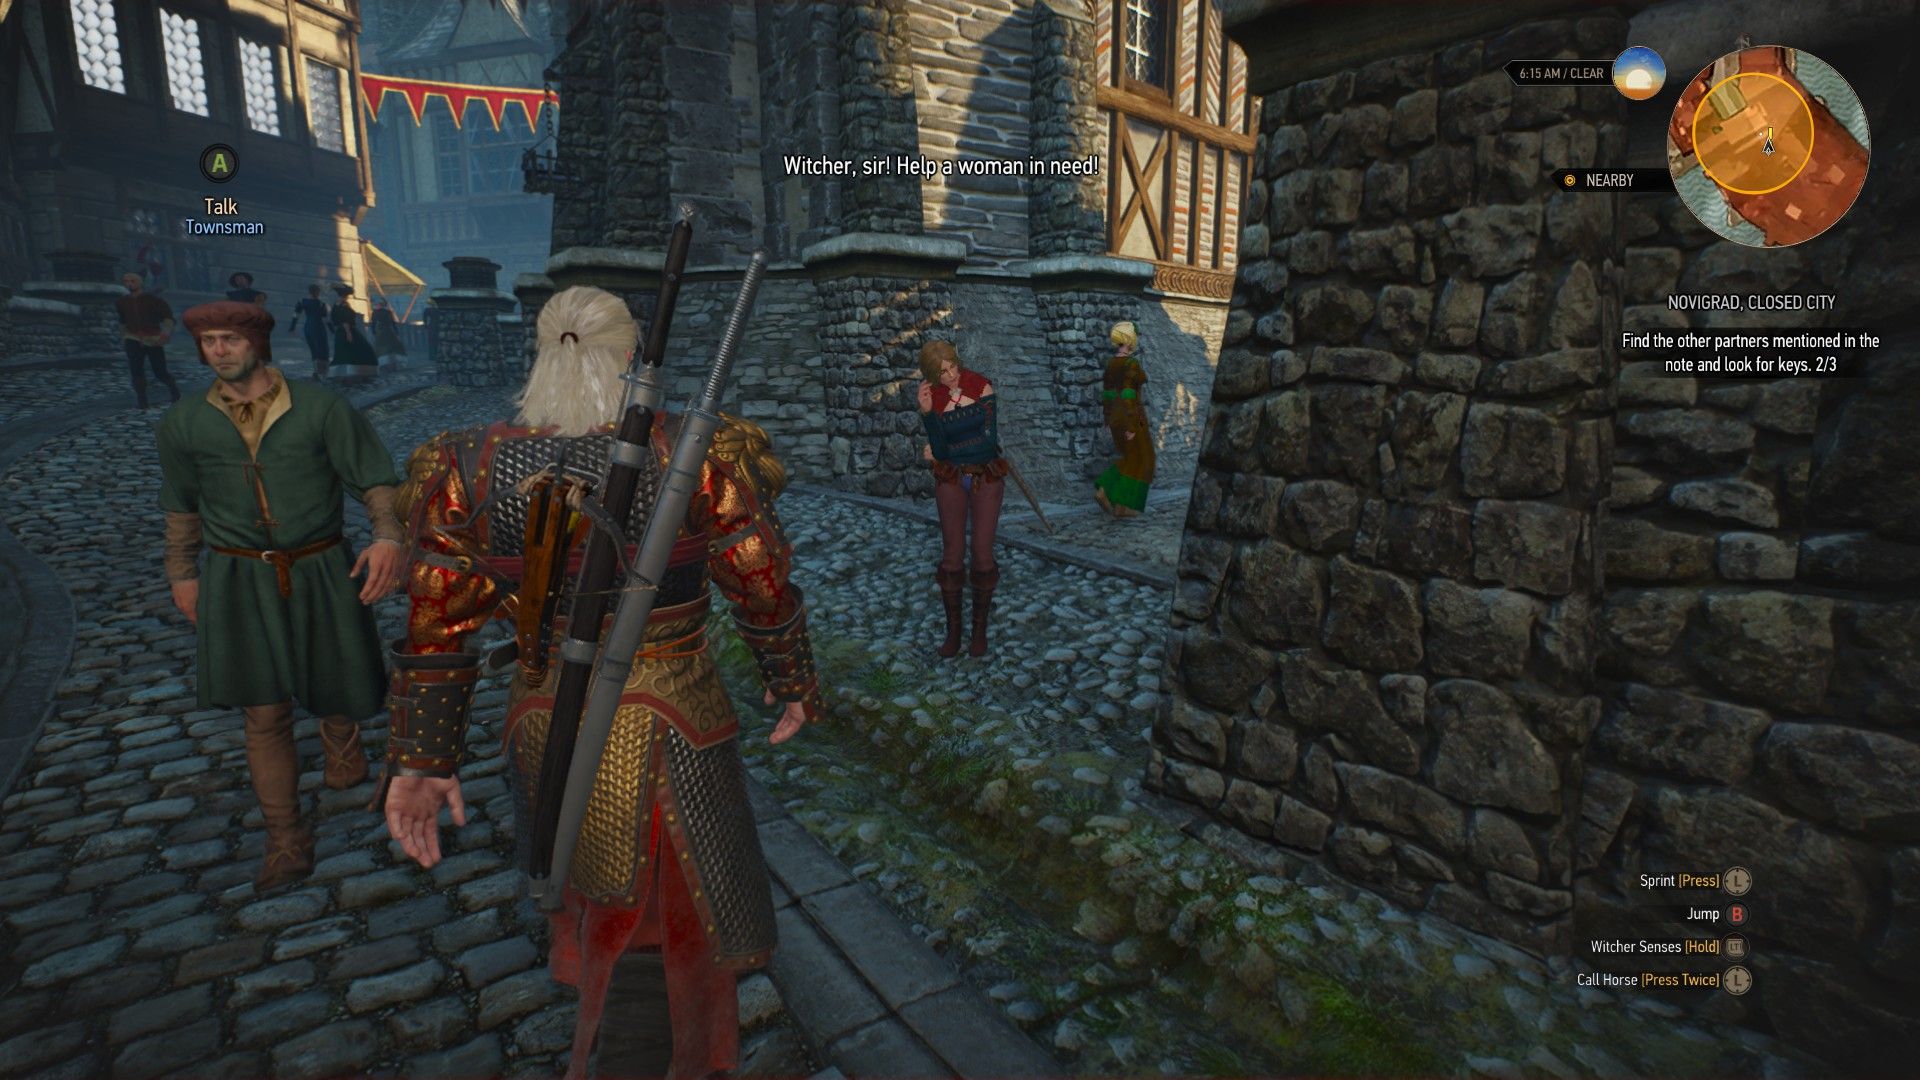 A screenshot of The Witcher 3, with Geralt walking up to a blonde woman on a cobbled road asking for help.